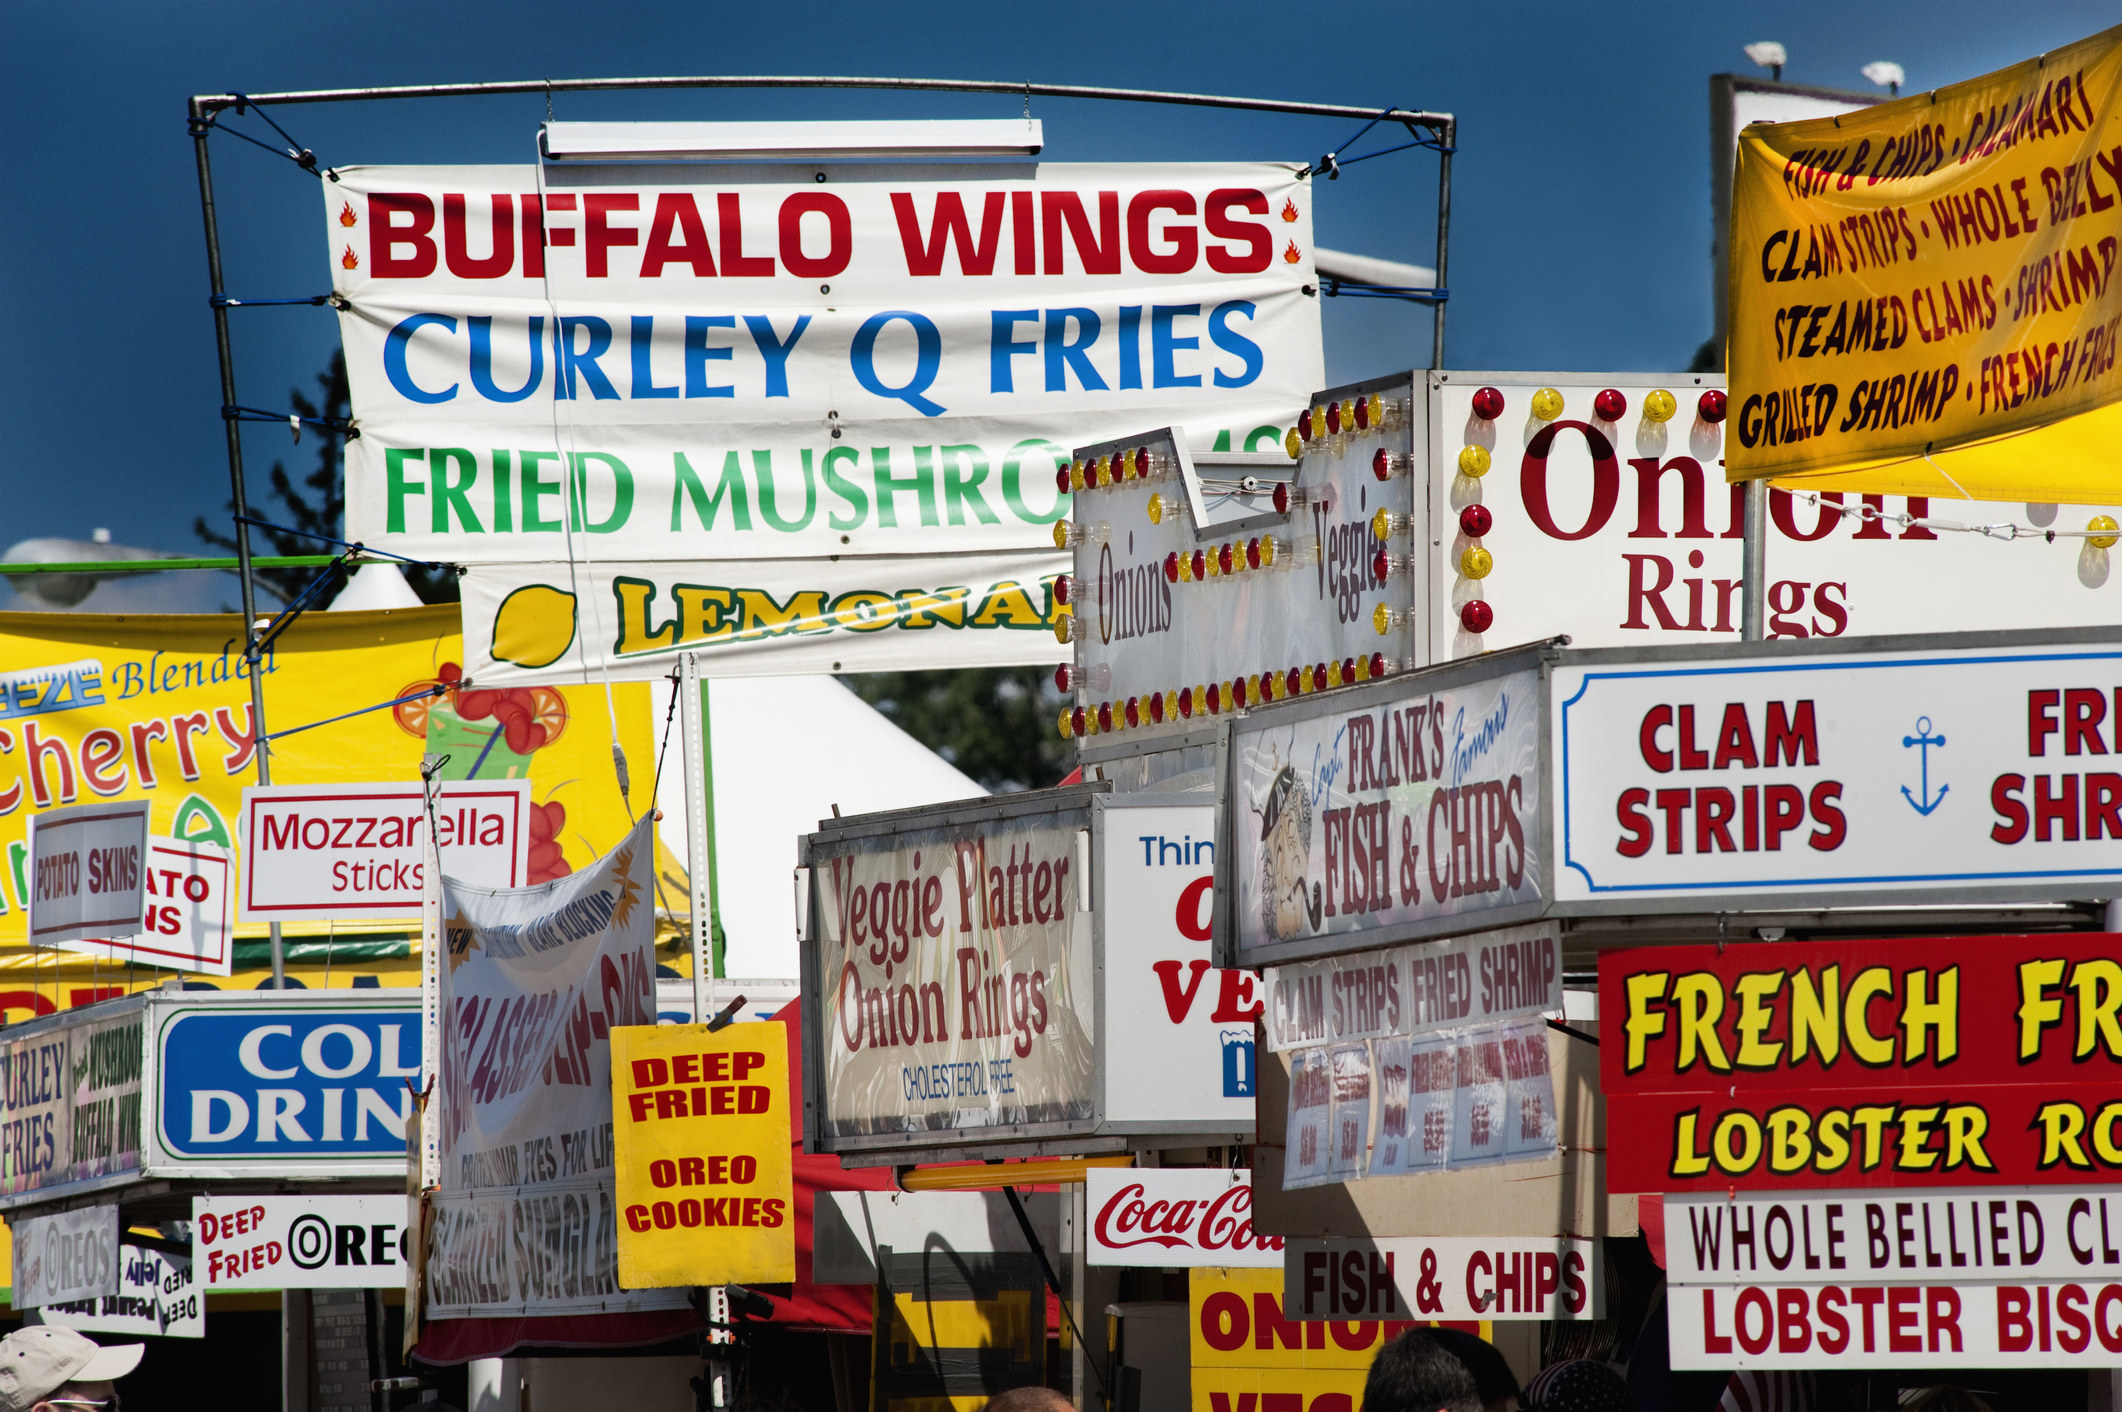 Food stands selling fried foods at a fair.